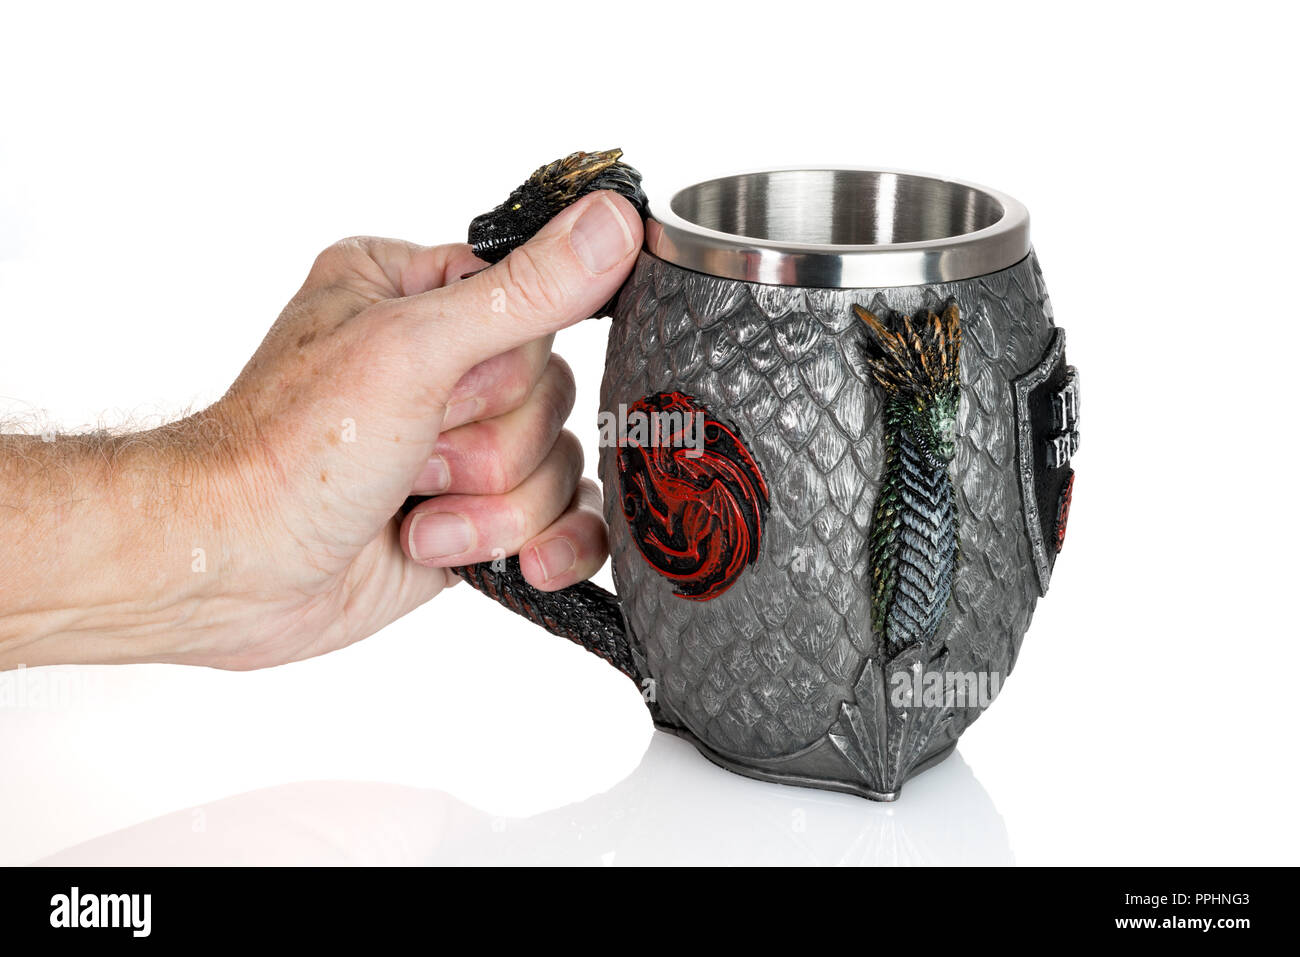 Official authorized tankard from Game of Thrones series Stock Photo